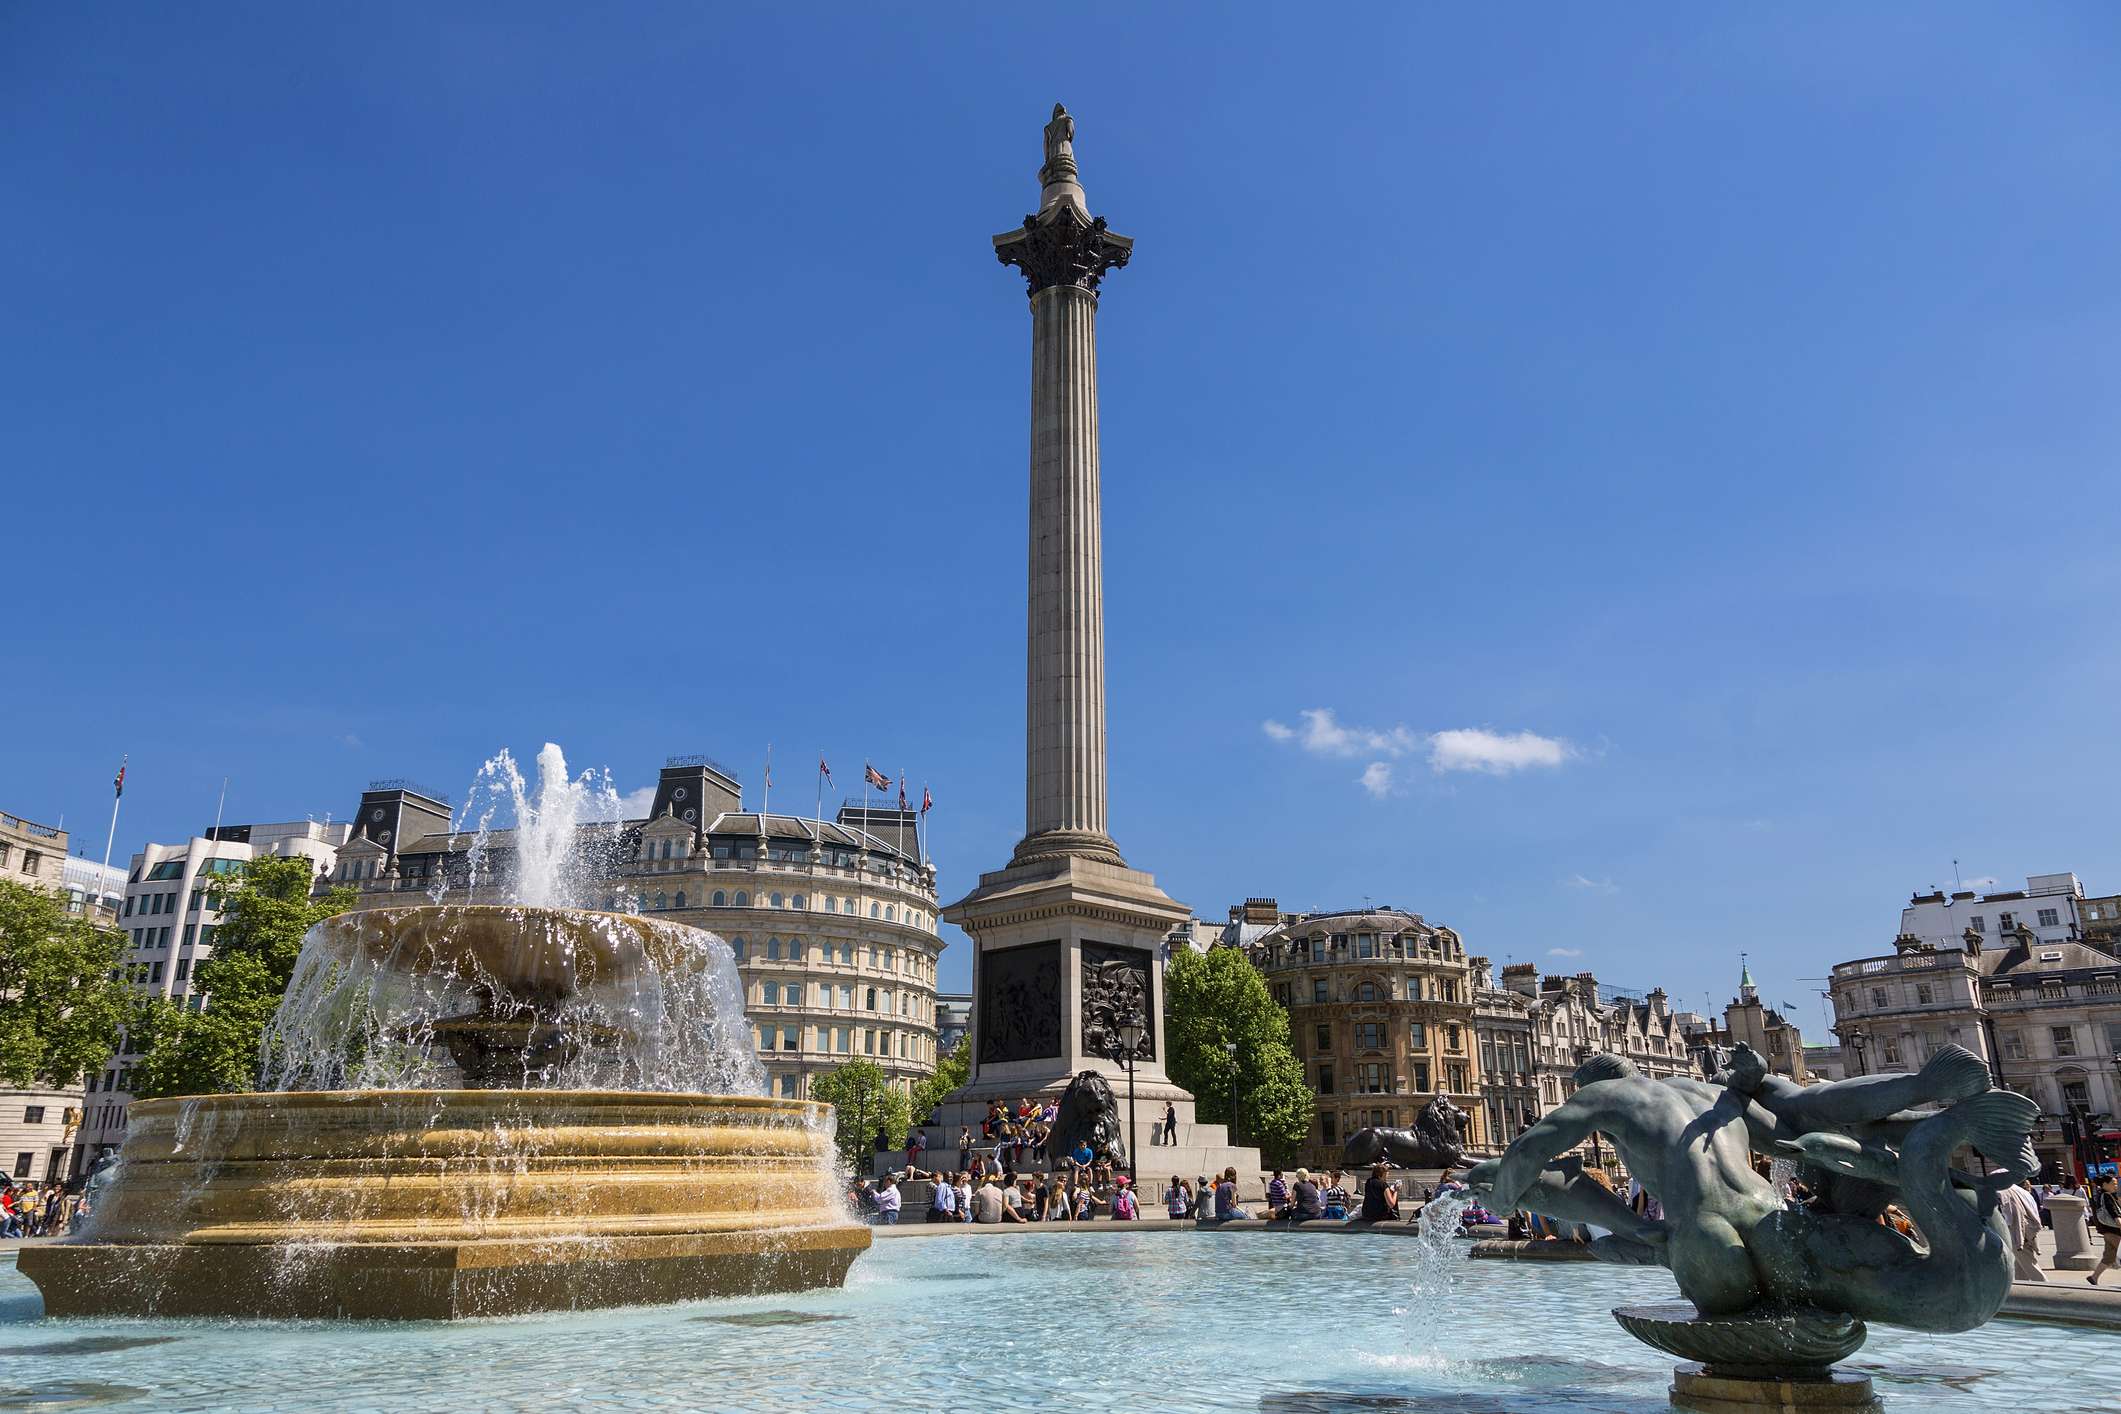 nelsons column and fountain at trafalgar square